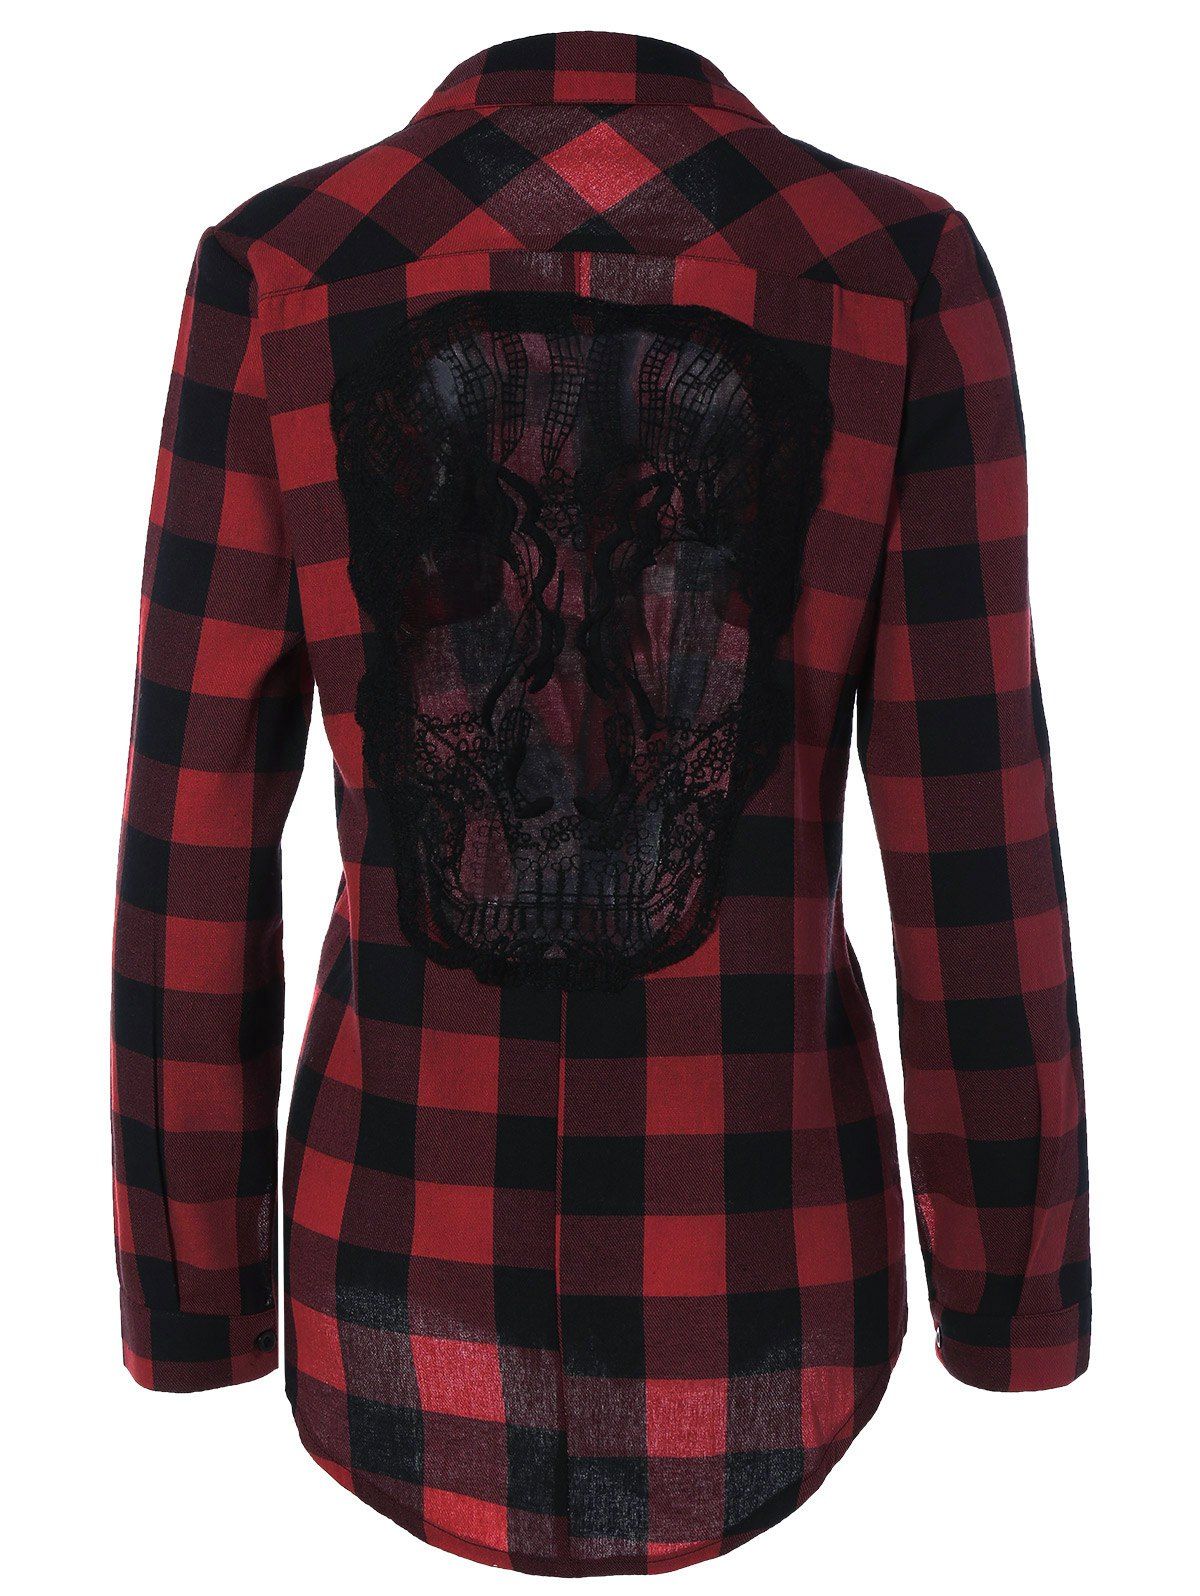 [17% OFF] 2021 Plaid Back Skull Pattern Flannel Shirt In DEEP RED ...